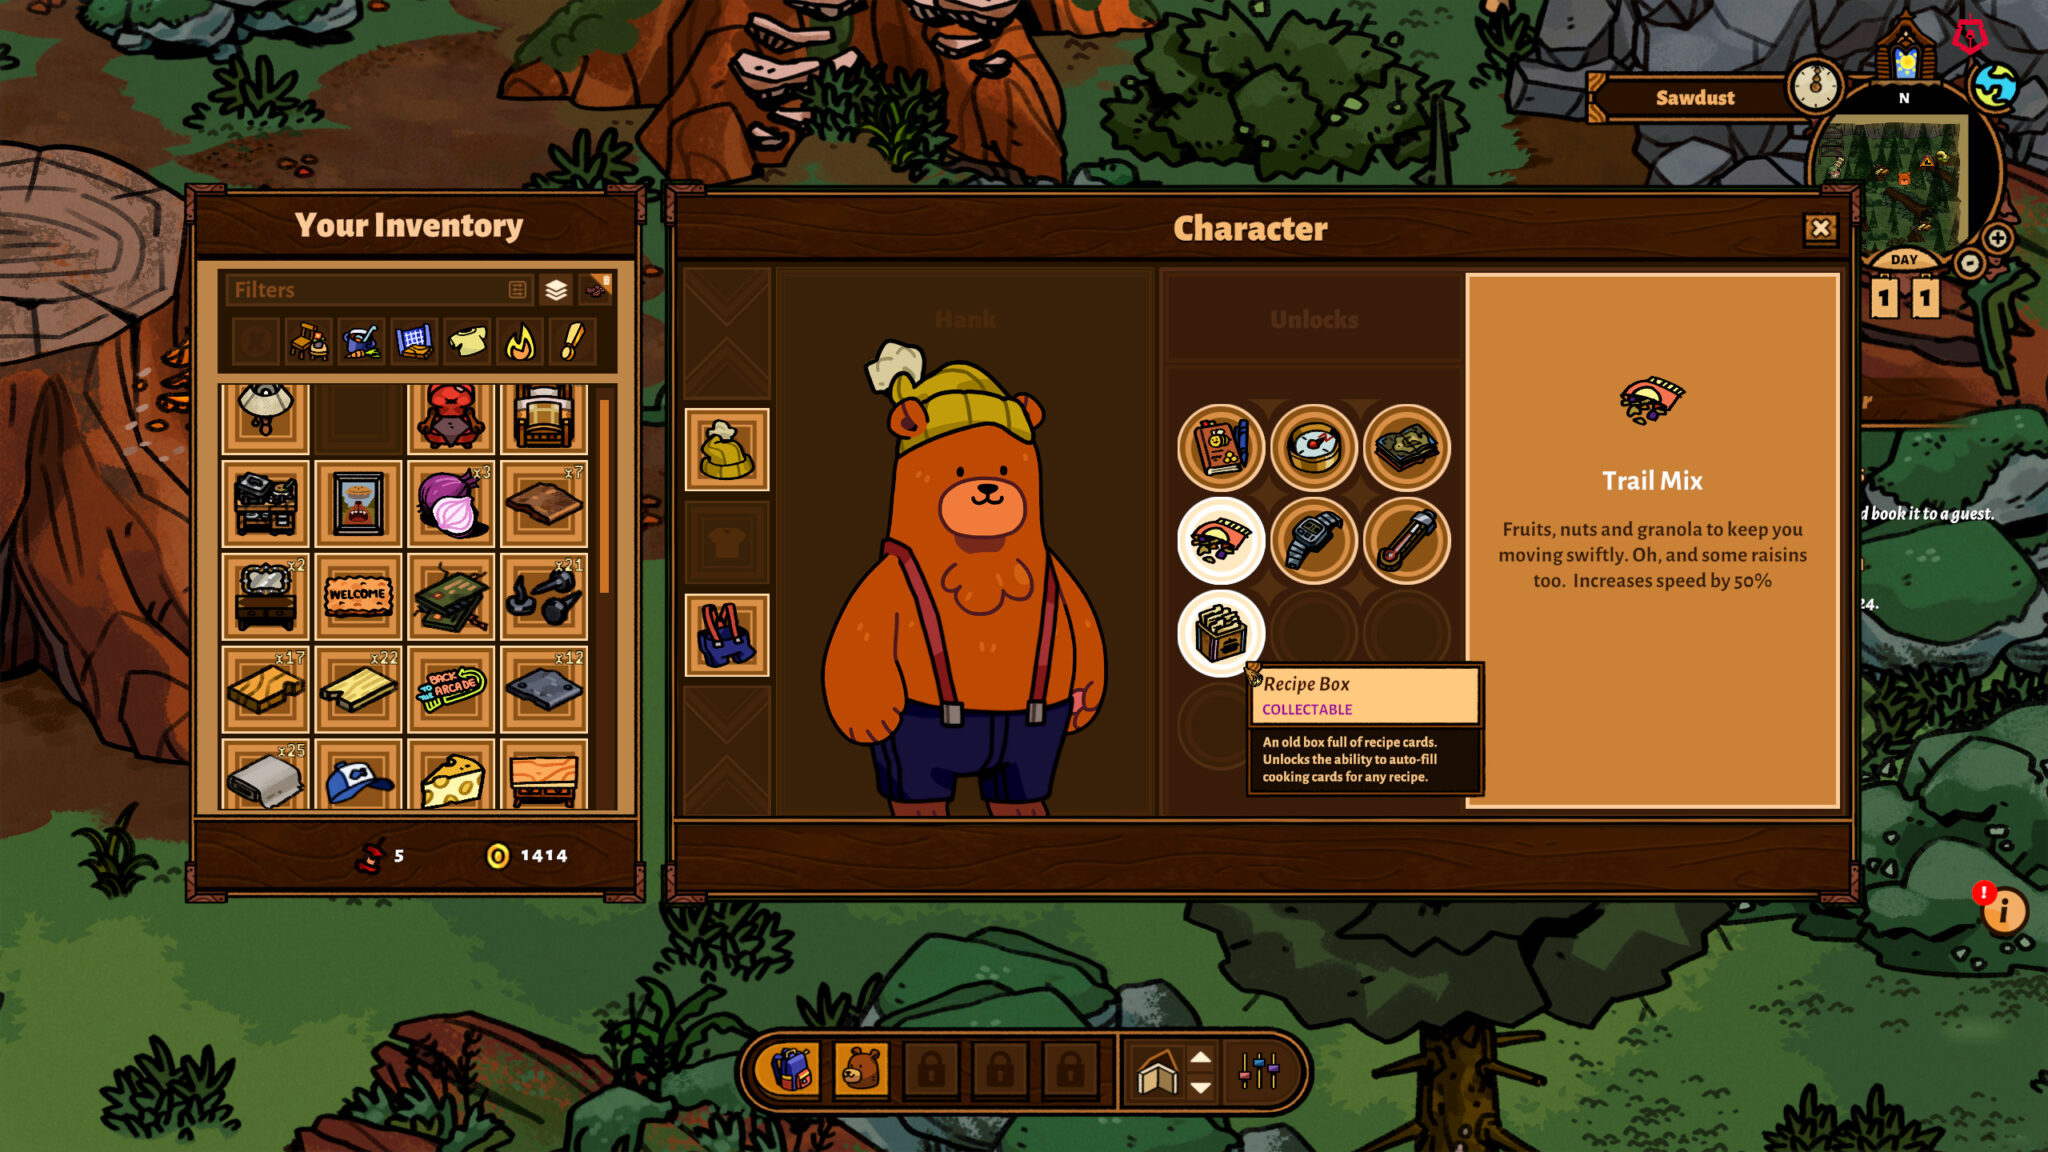 Bear and Breakfast character menu featuring the bear in pants with suspenders and a yellow winter hat